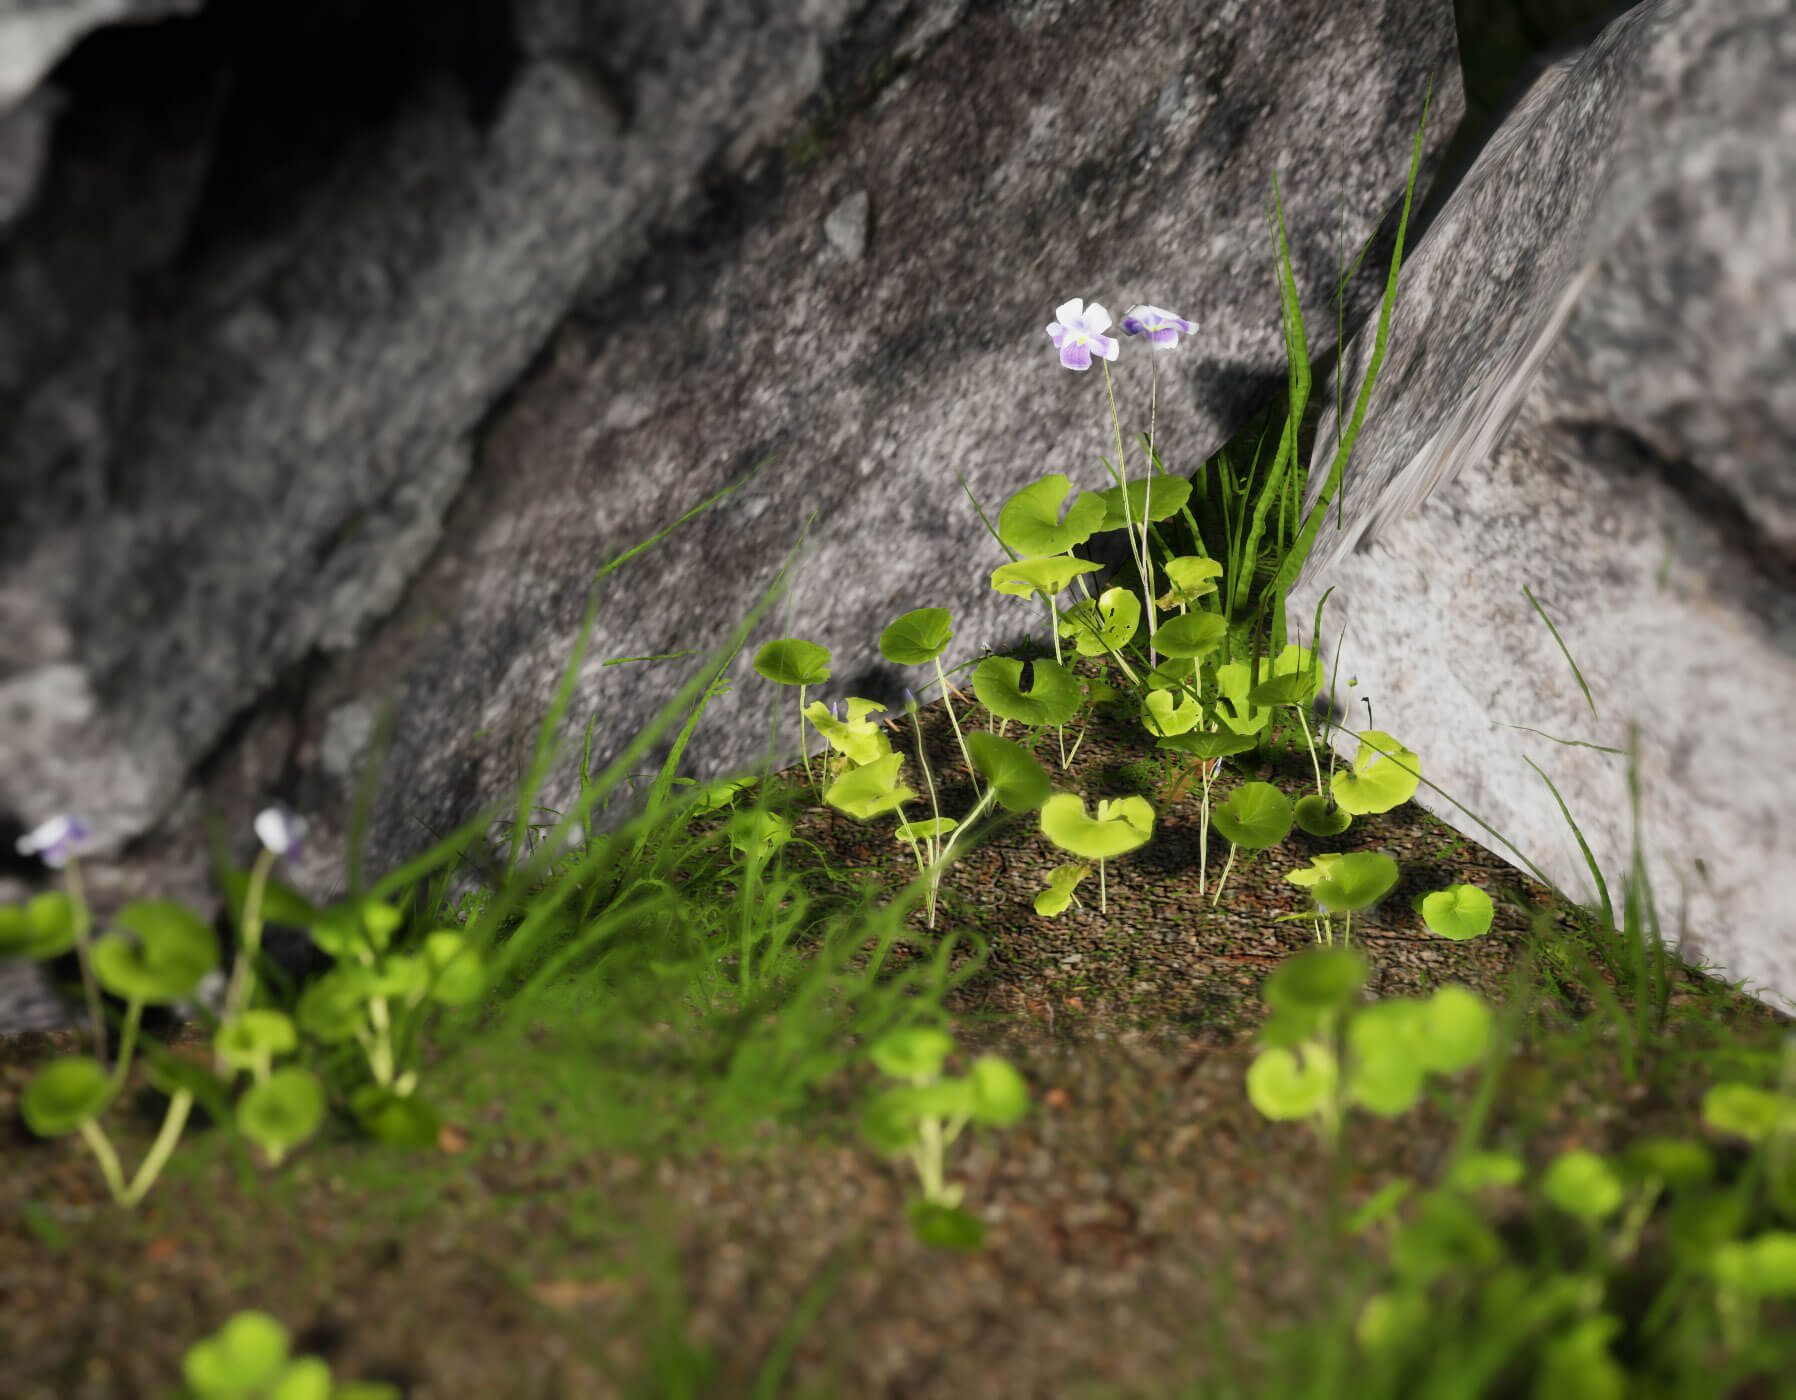 Realistic digital art of ferns and flowers flanked by boulders.